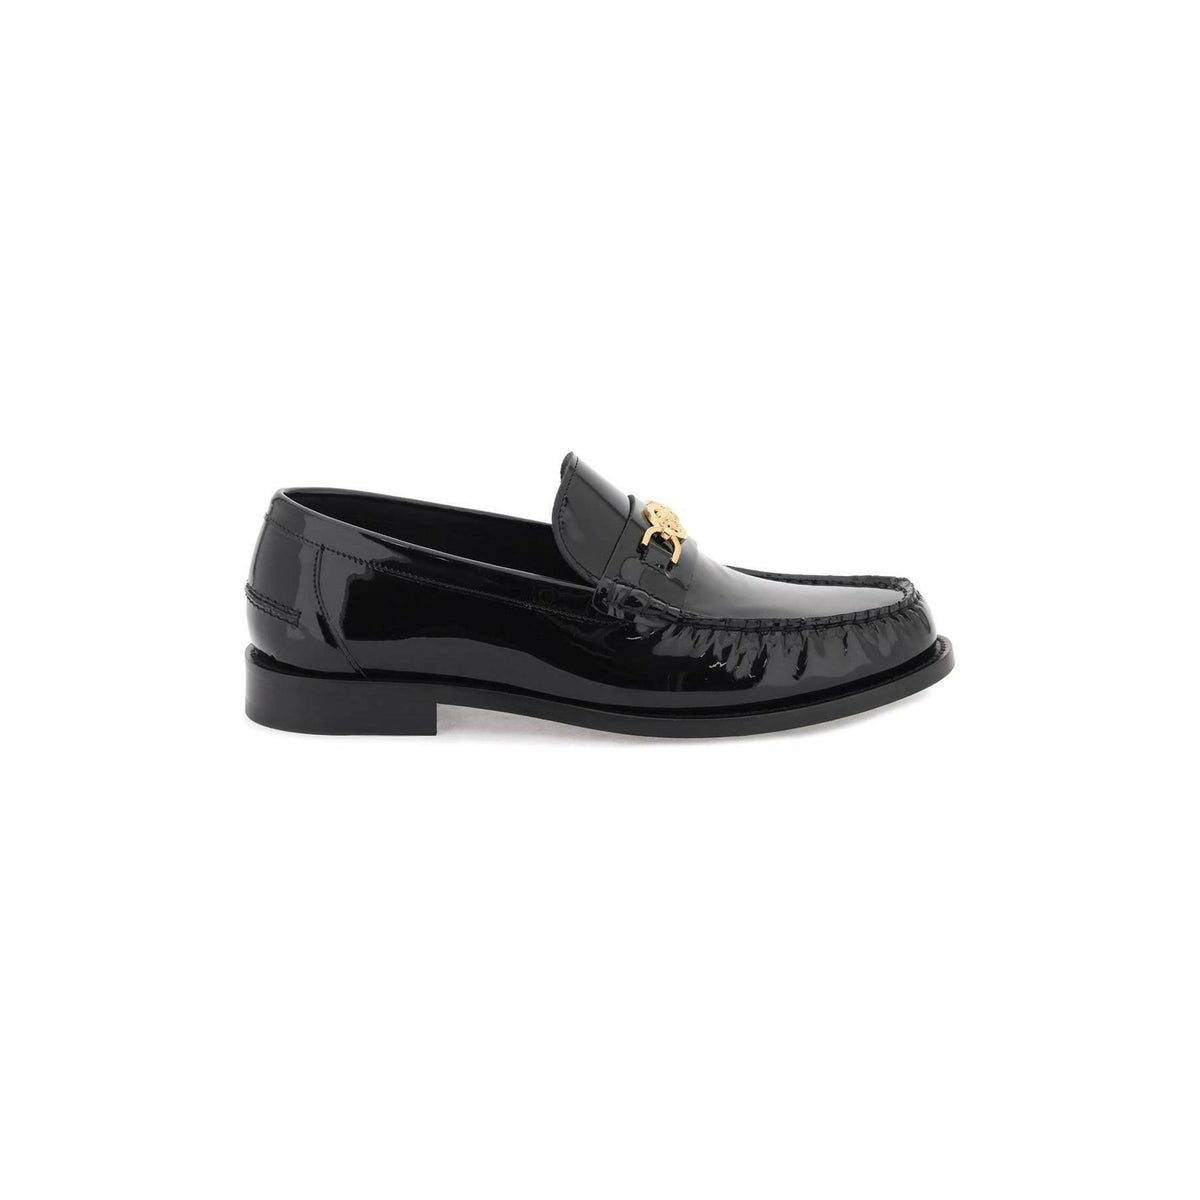 Black Patent Leather Medusa '95 Loafers With Gold Detail VERSACE JOHN JULIA.